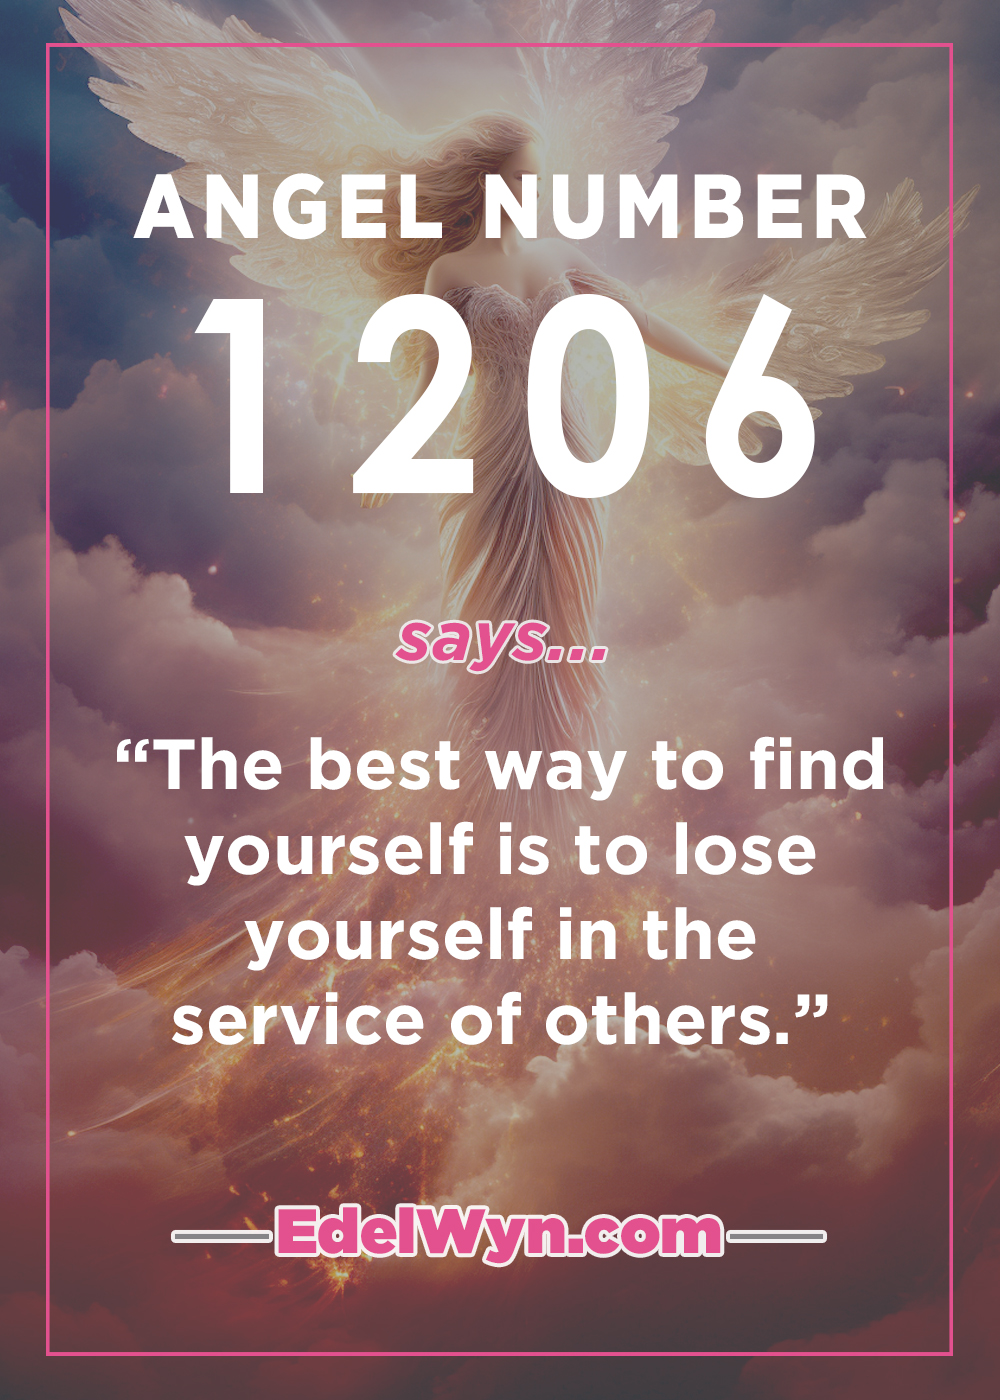 Discover The Truth About 1206 Angel Number And Its Hidden Powers.